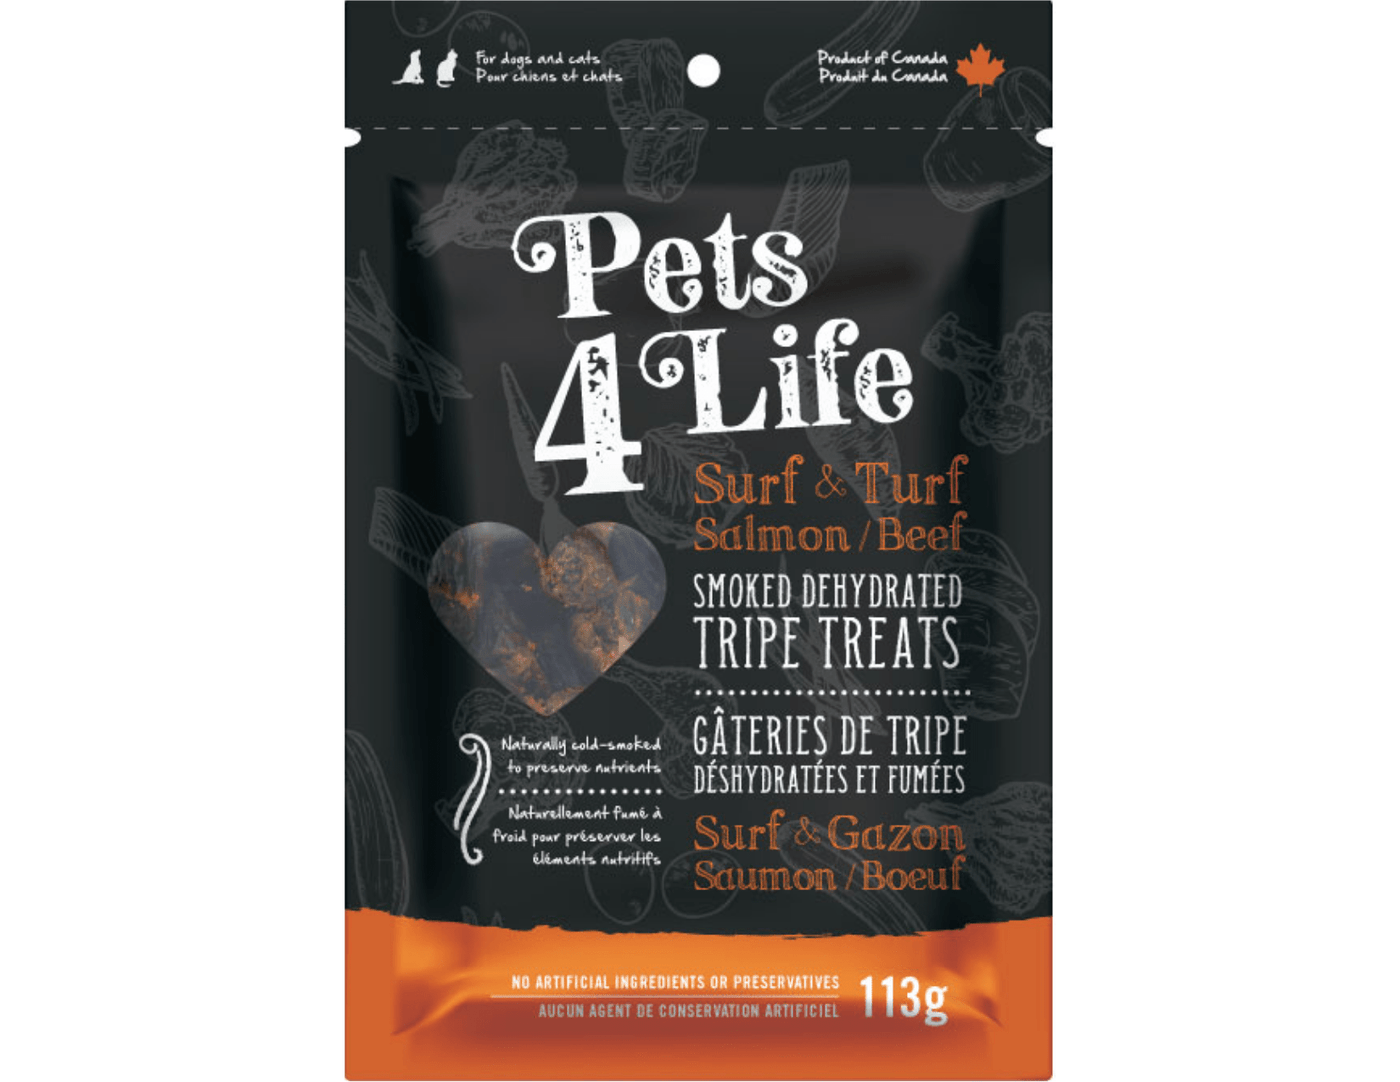 Salmon & Beef Smoked Dehydrated Tripes - Dehydrated/Air-Dried Dog Treats - Pets4Life